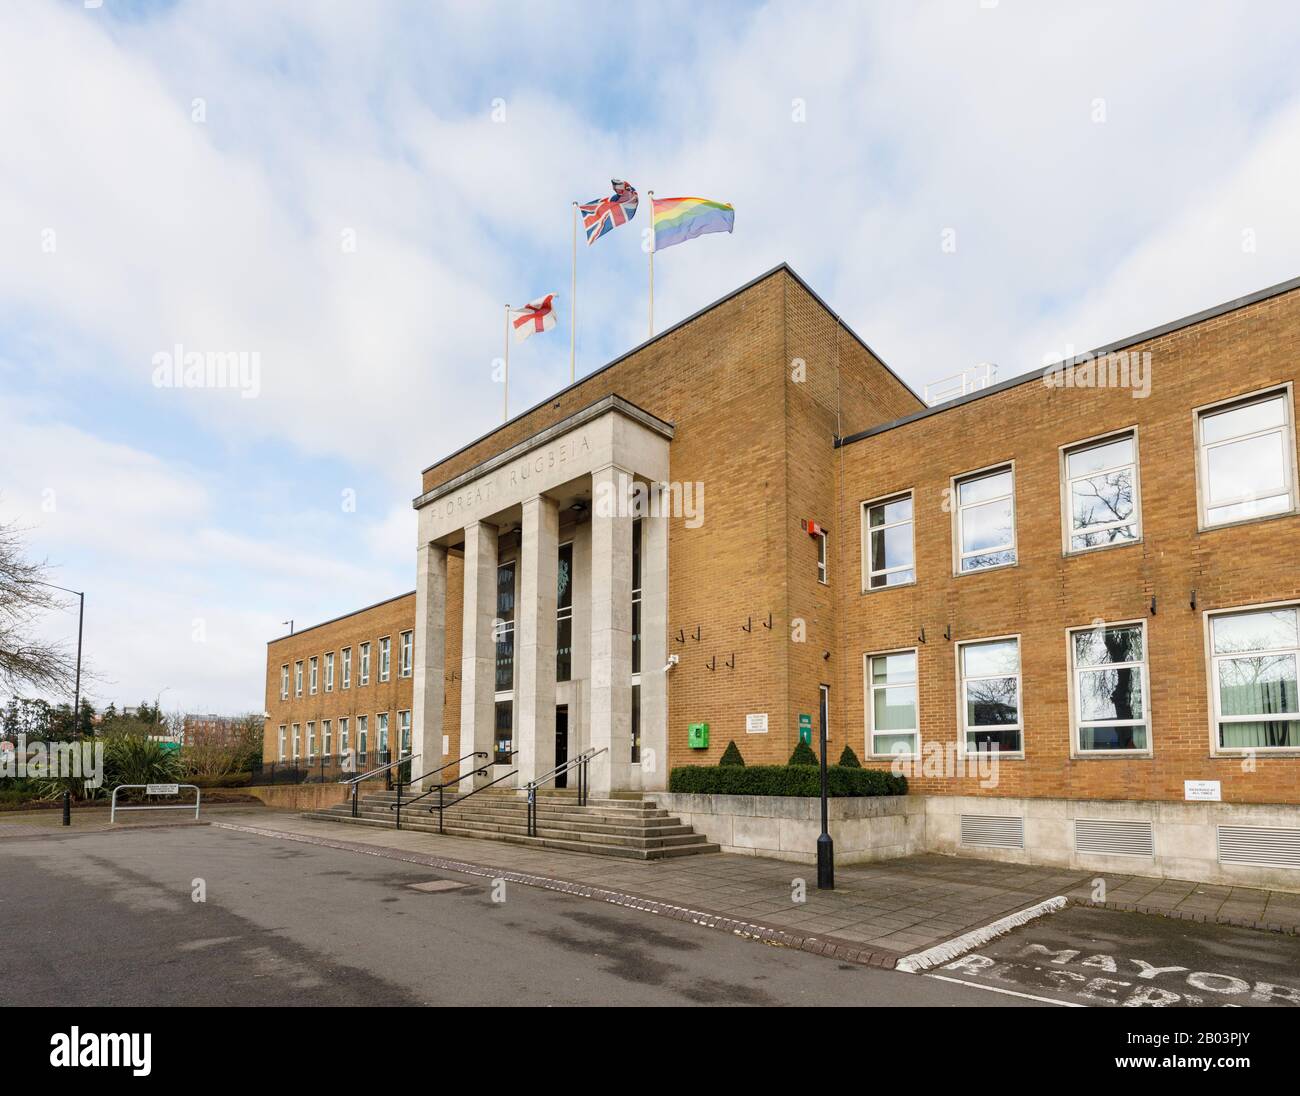 Rugby, Warwickshire, UK, February 2020: Rugby Town Hall, is located on Evreux Way and contains the offices of Rugby Borough Council. Stock Photo